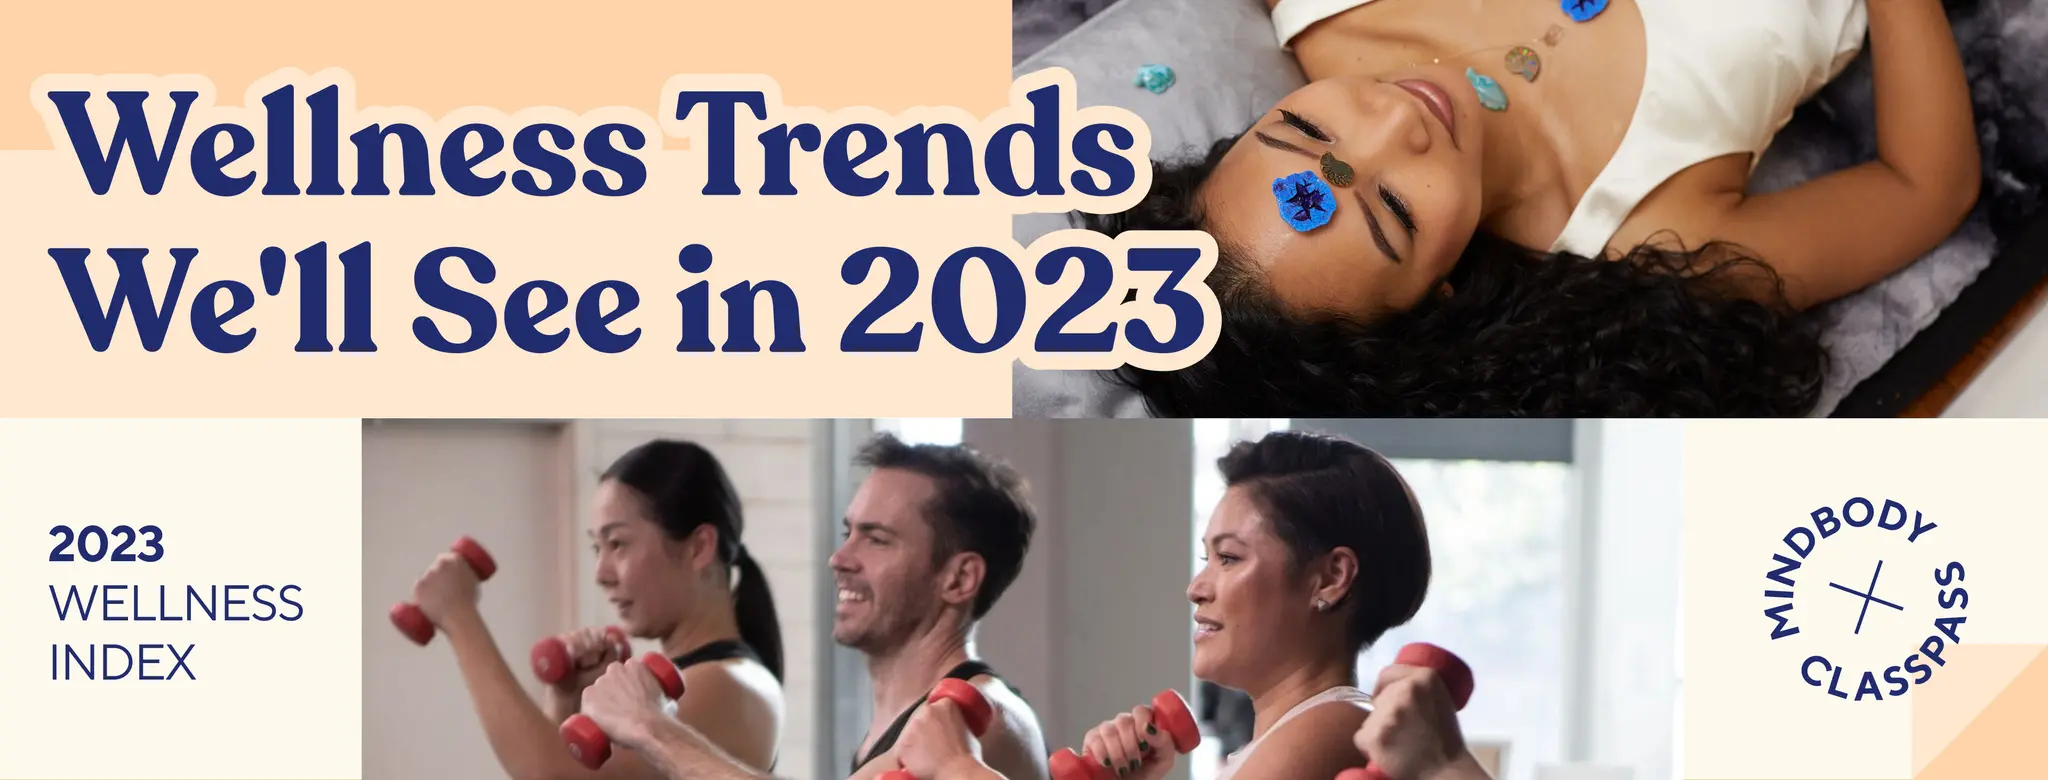 Wellness Trends We'll See in 2023